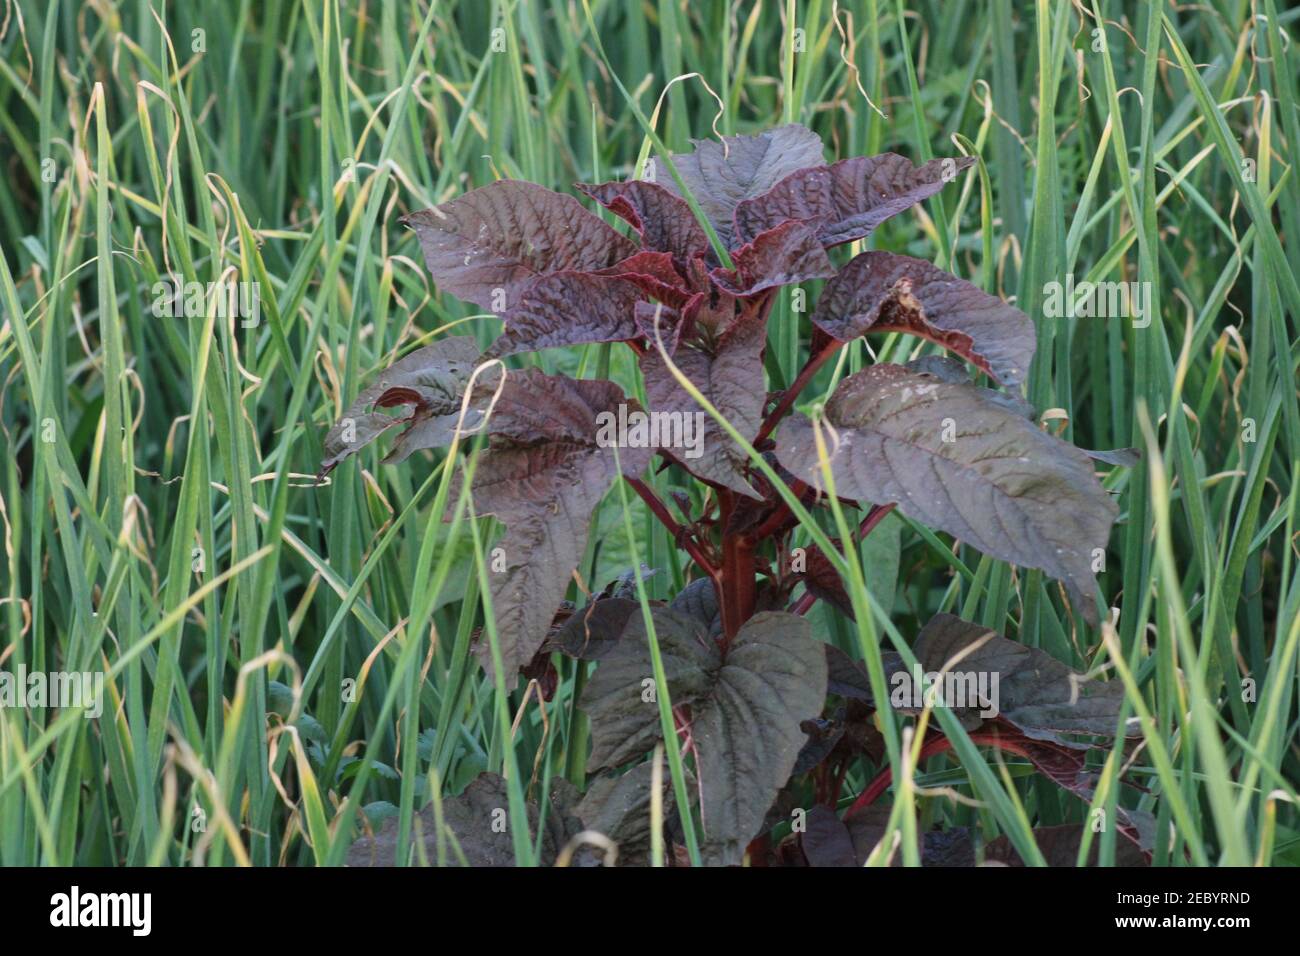 Fresh healthy vegetable food in the field photo capture from Bangladesh. Stock Photo